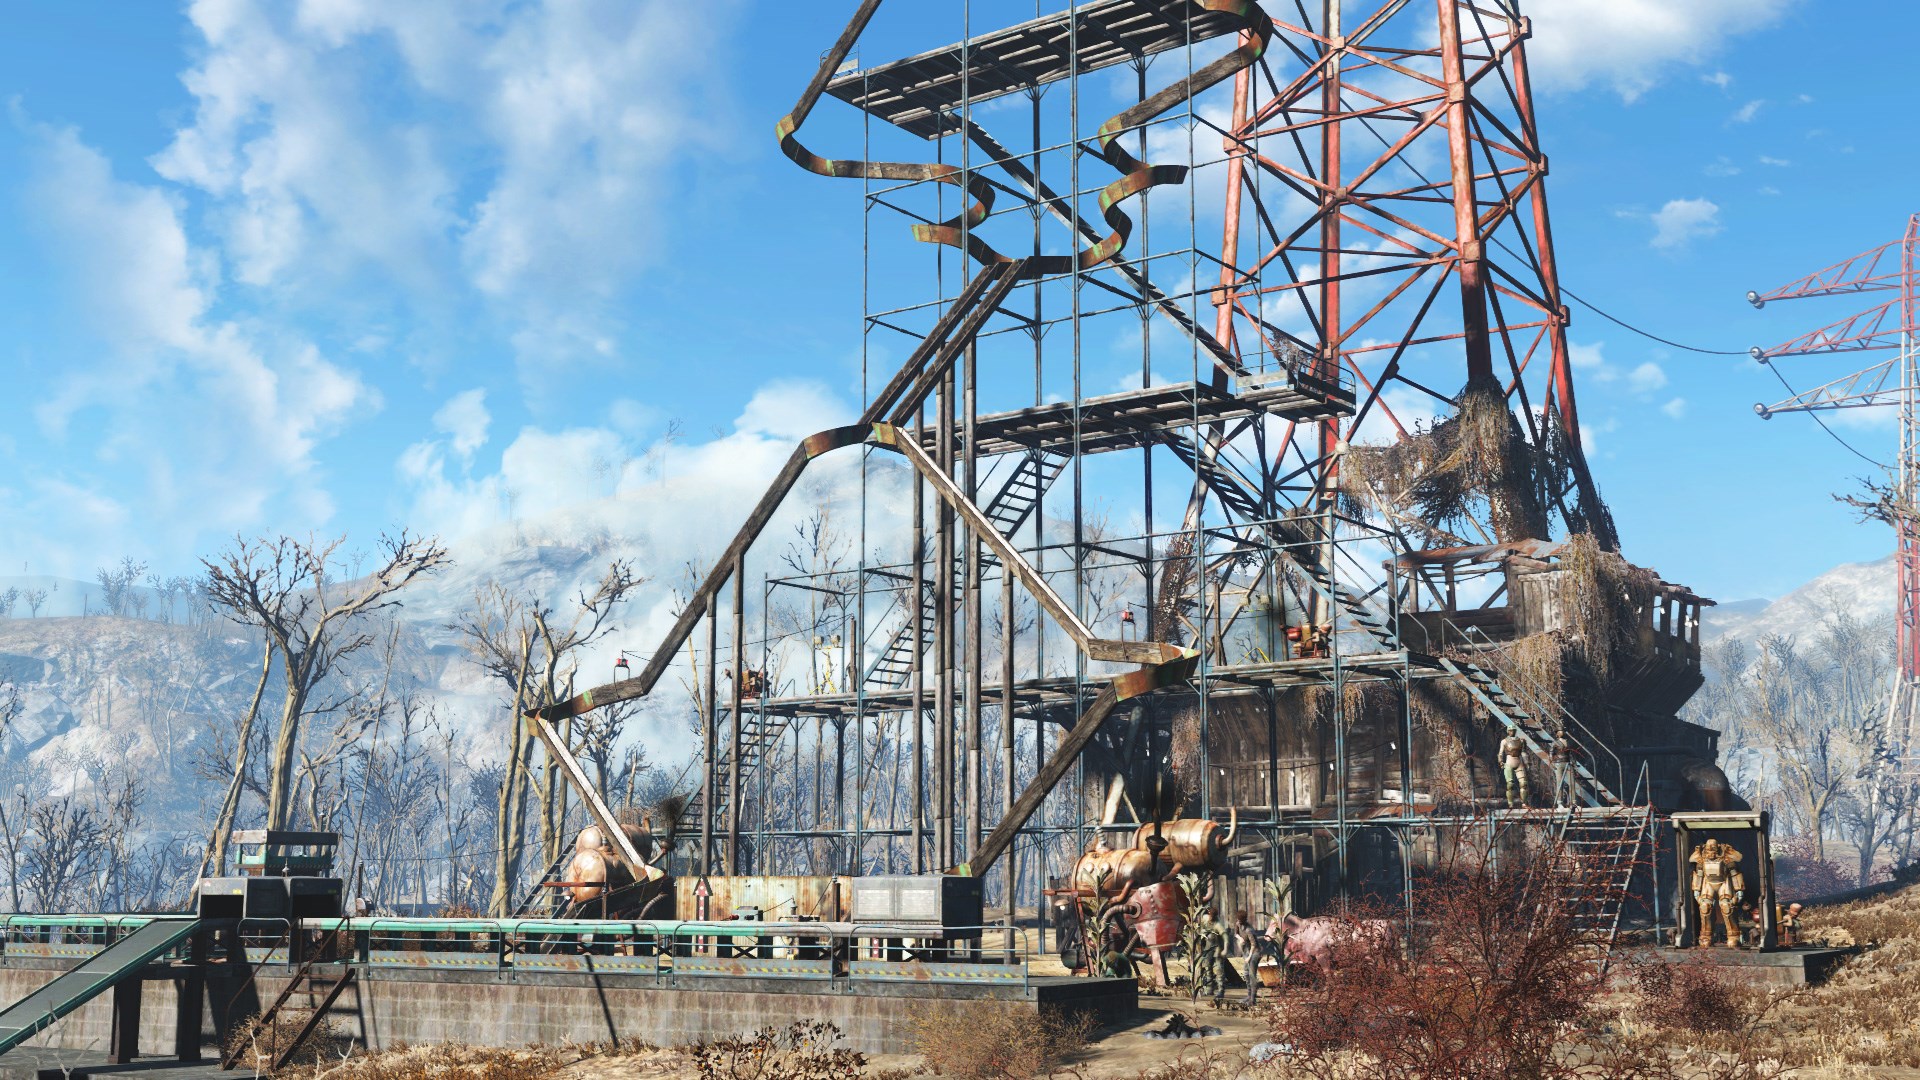 Contraption workshop fallout 4 фото 20